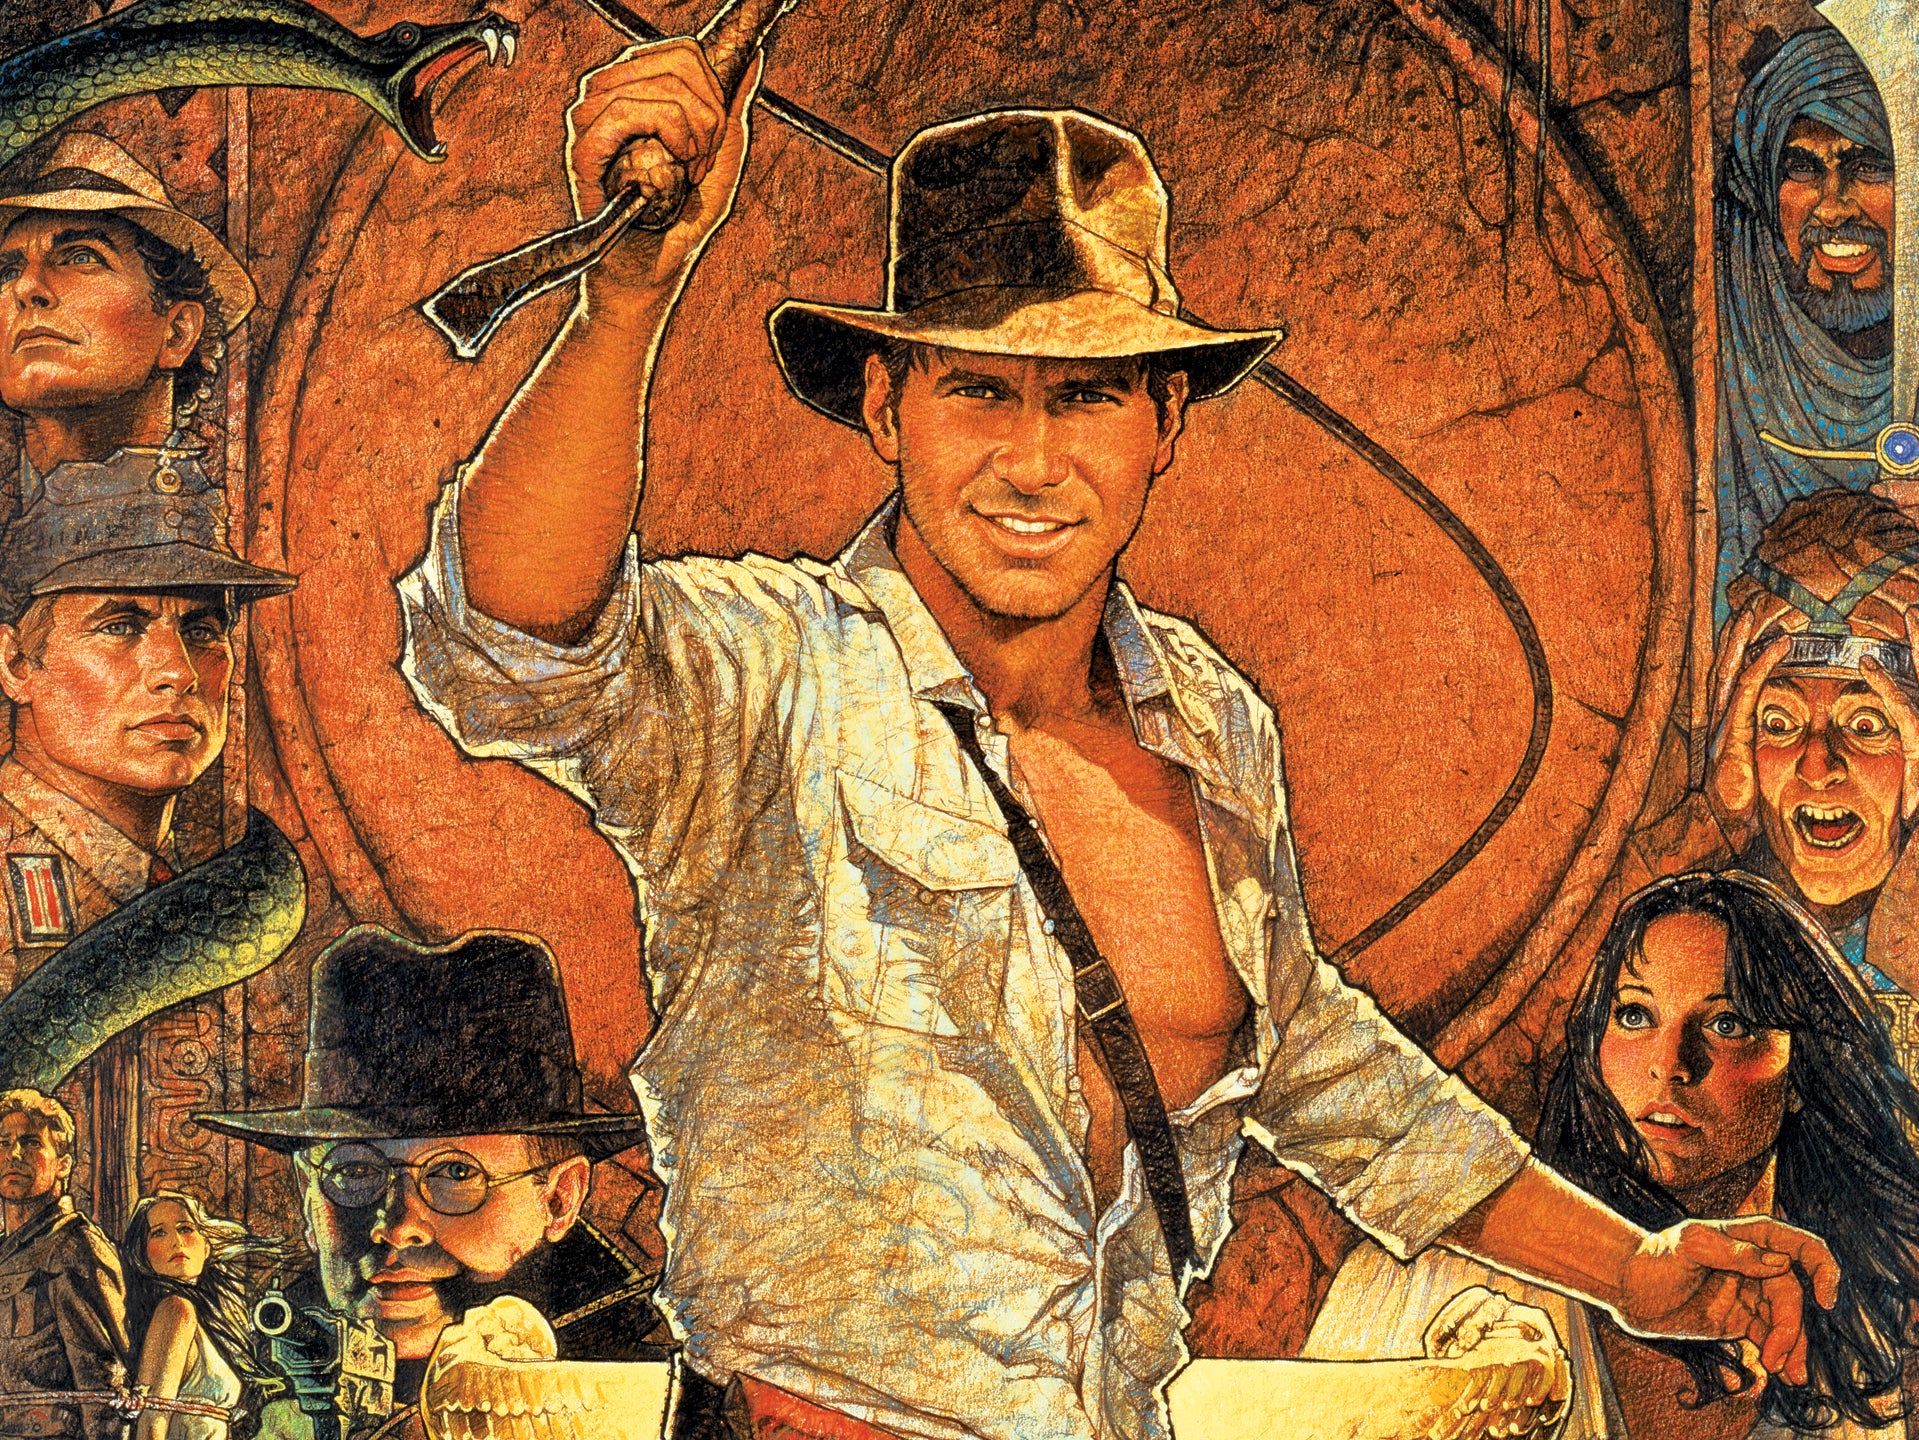 Promotional artwork for ‘Raiders of the Lost Ark’ – the first Indiana Jones film